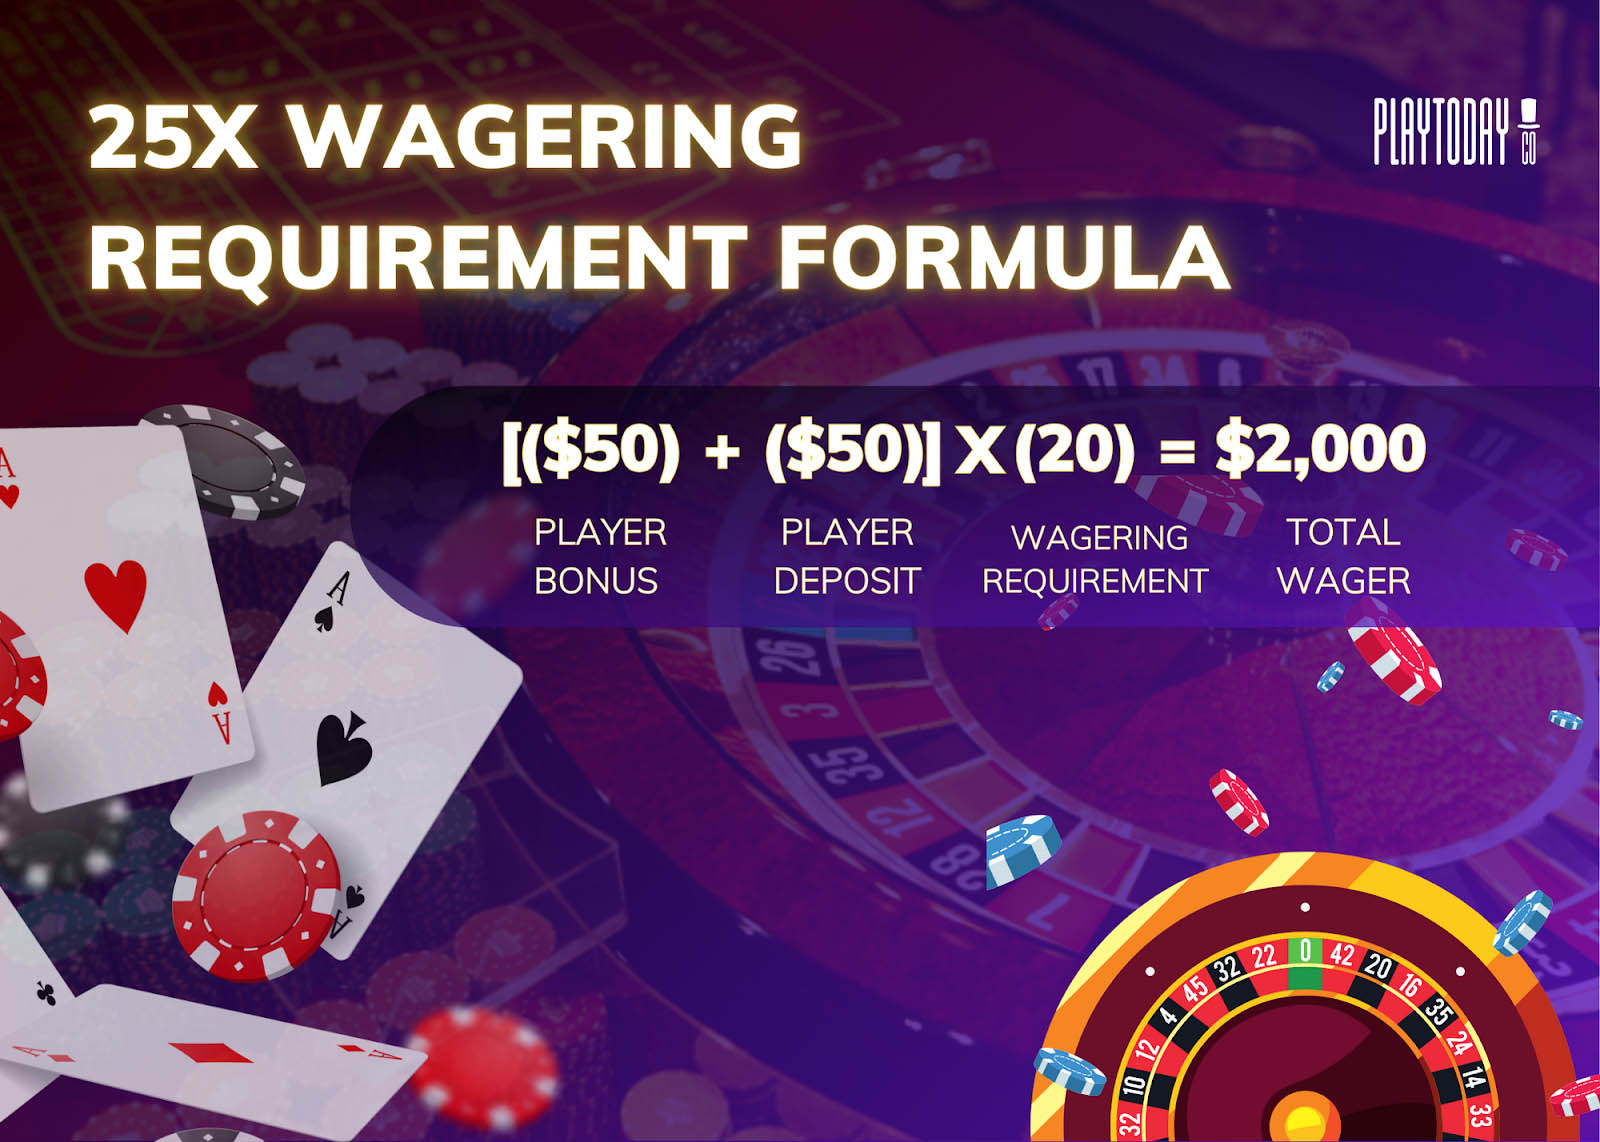 Wagering requirement tips